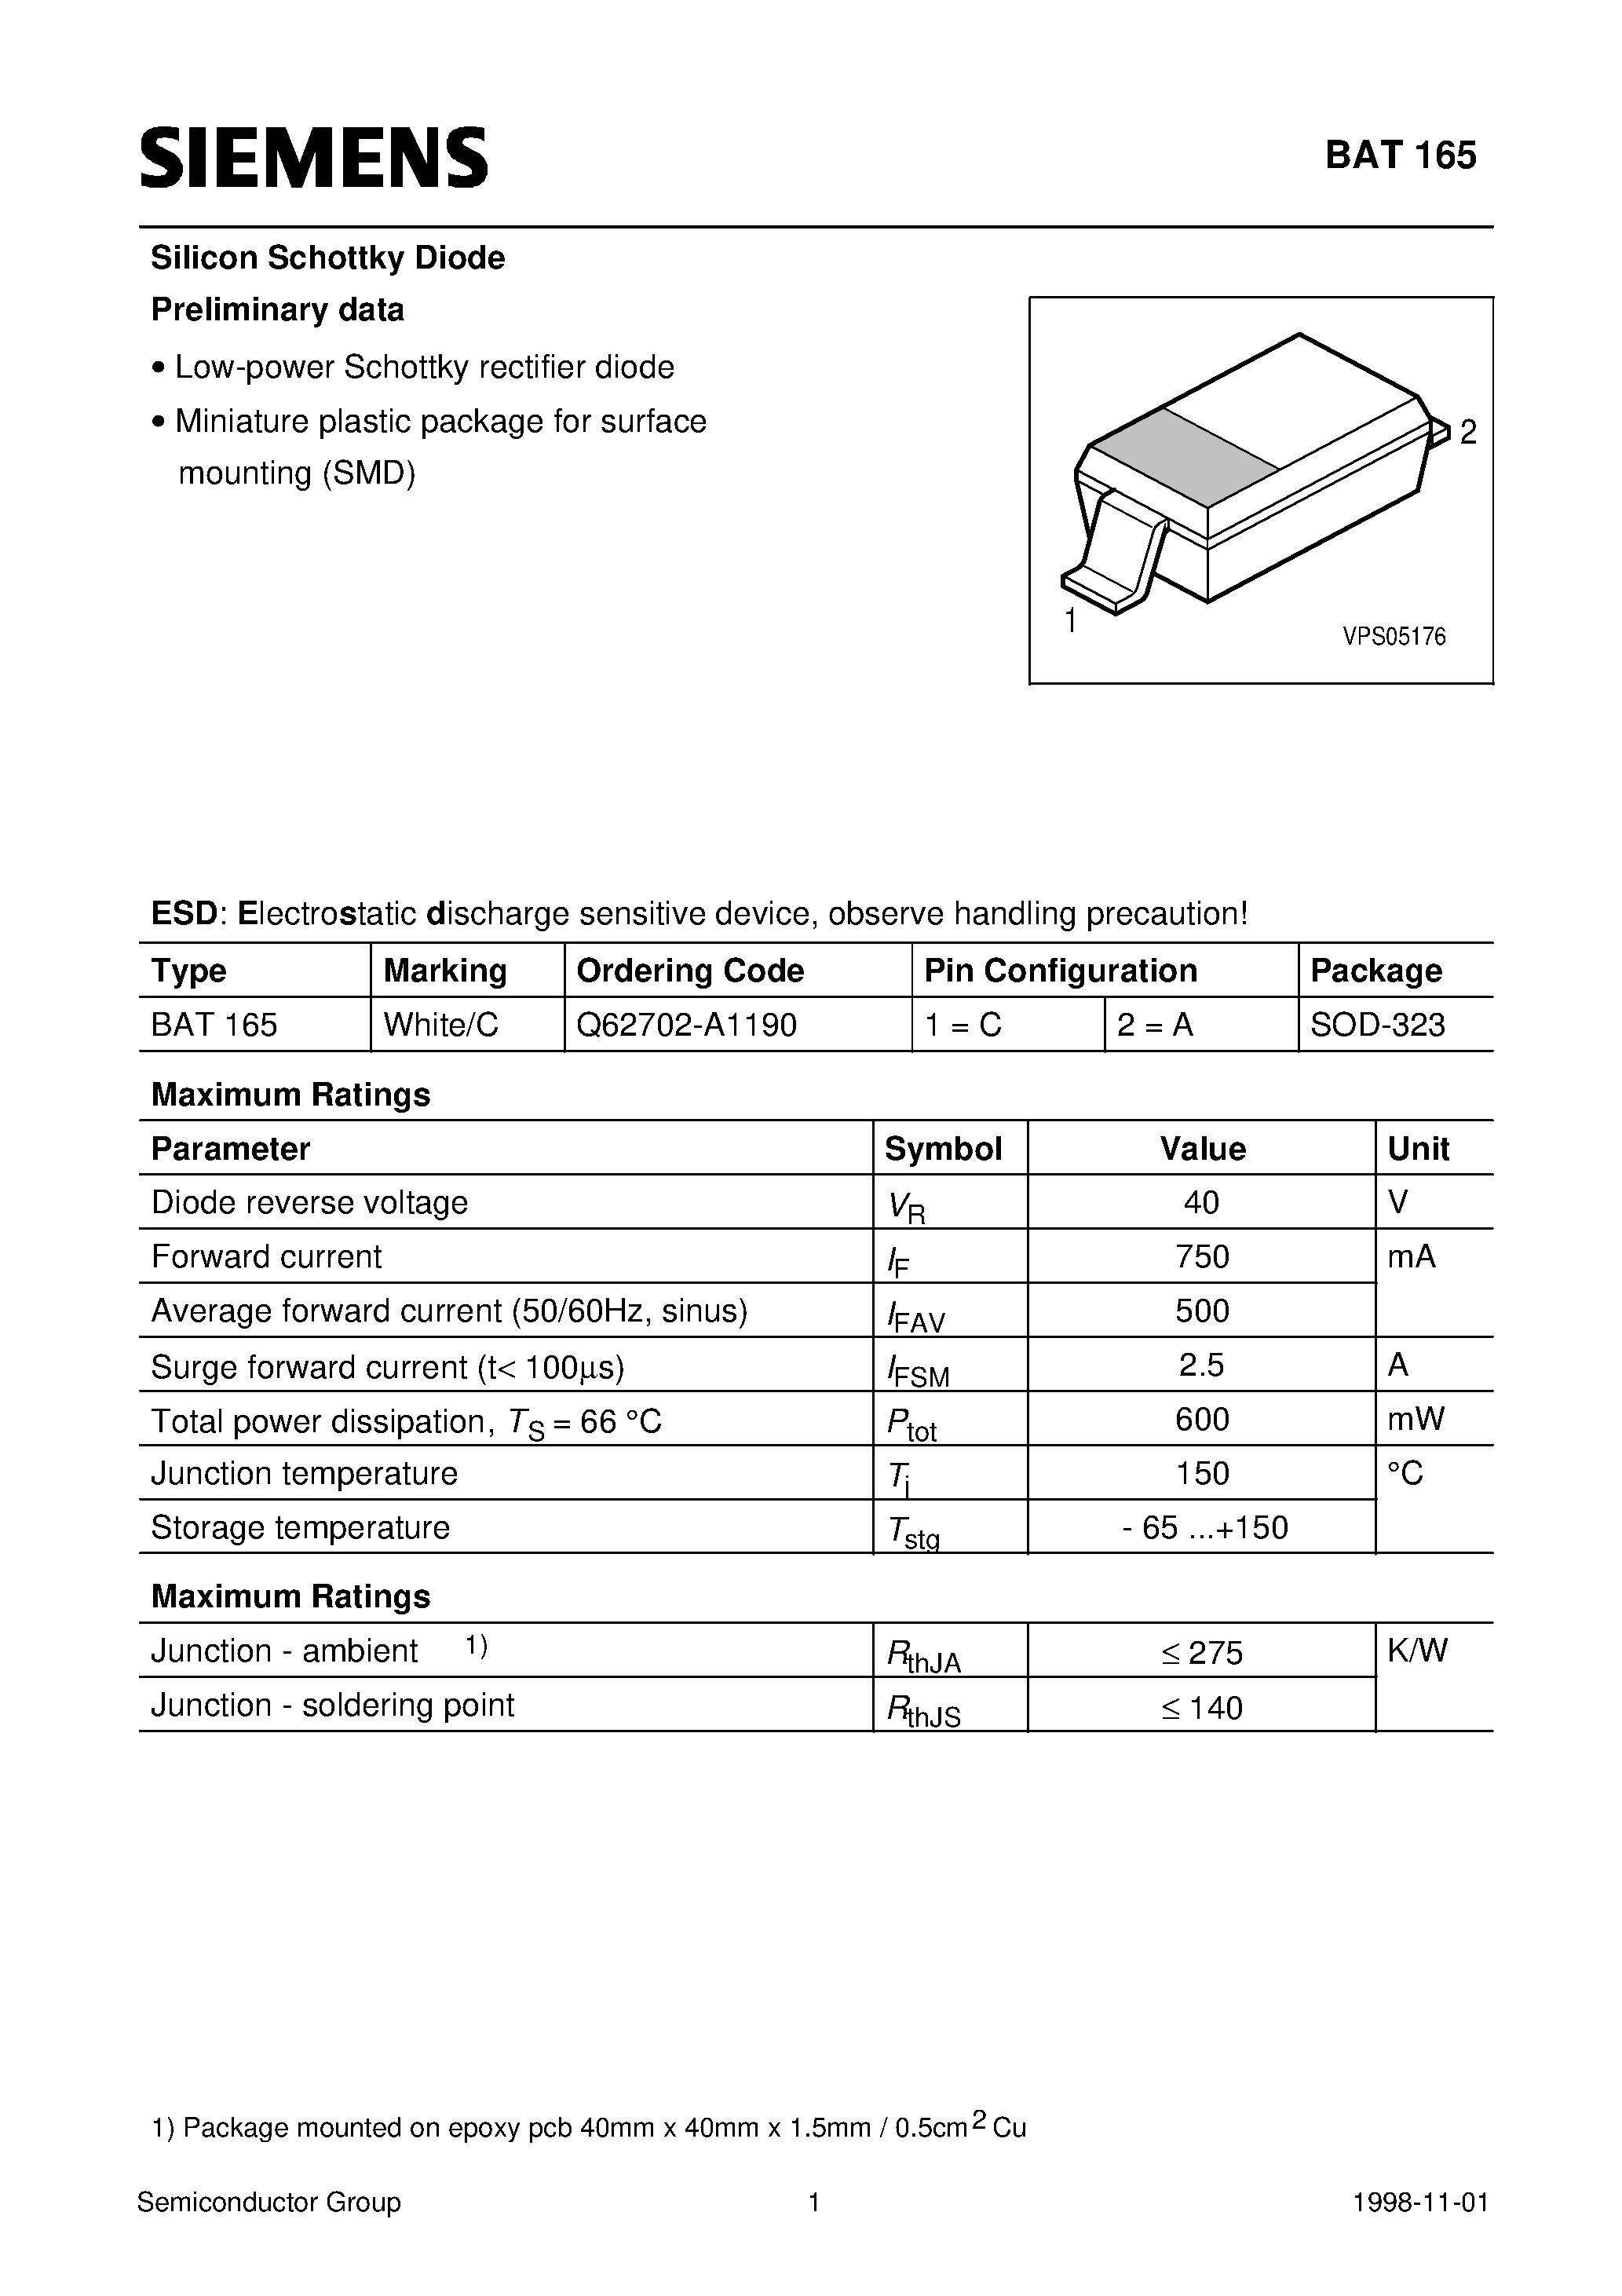 Datasheet BAT165 - Silicon Schottky Diode (Low-power Schottky rectifier diode Miniature plastic package for surface mounting SMD) page 1